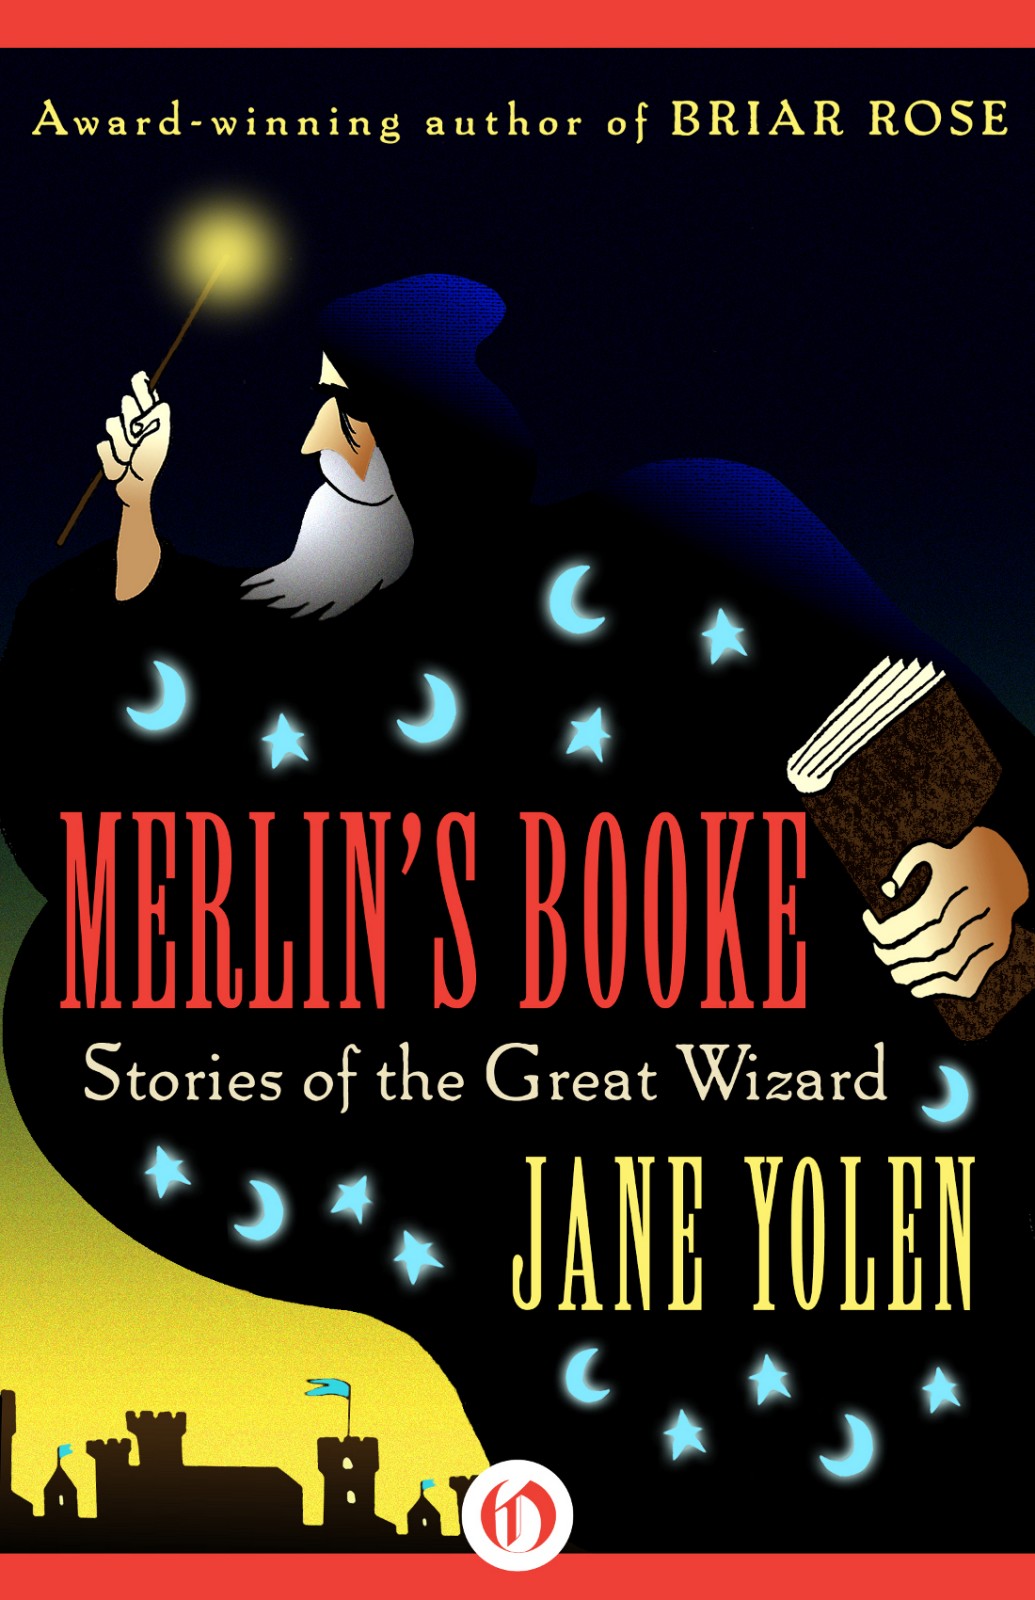 Merlin's Booke: Stories of the Great Wizard